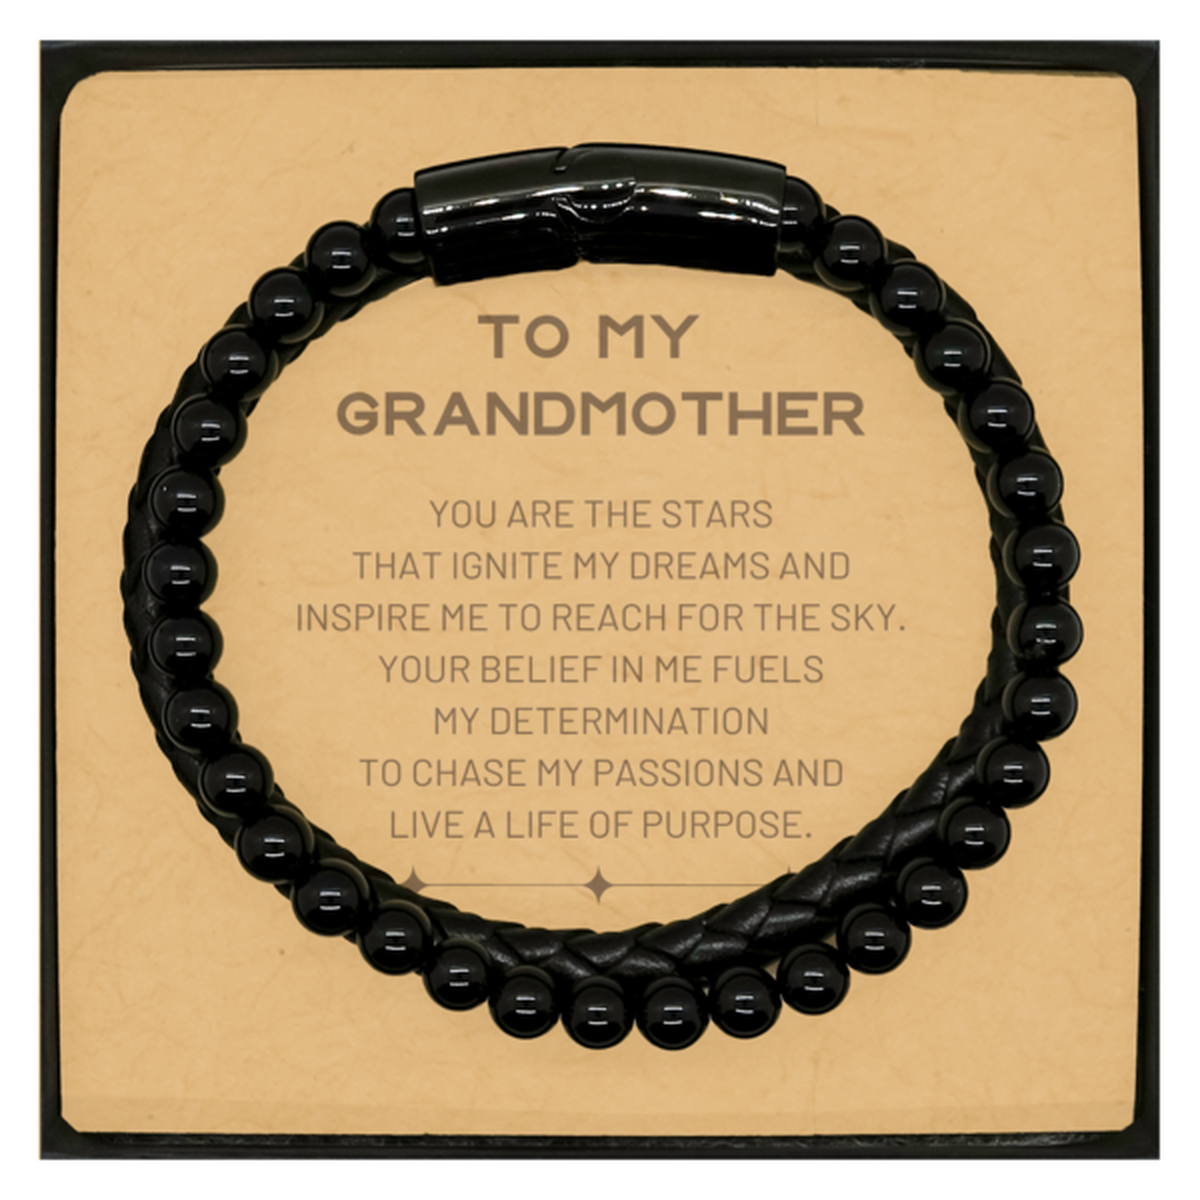 To My Grandmother Stone Leather Bracelets, You are the stars that ignite my dreams and inspire me to reach for the sky, Birthday Christmas Unique Gifts For Grandmother, Thank You Gifts For Grandmother